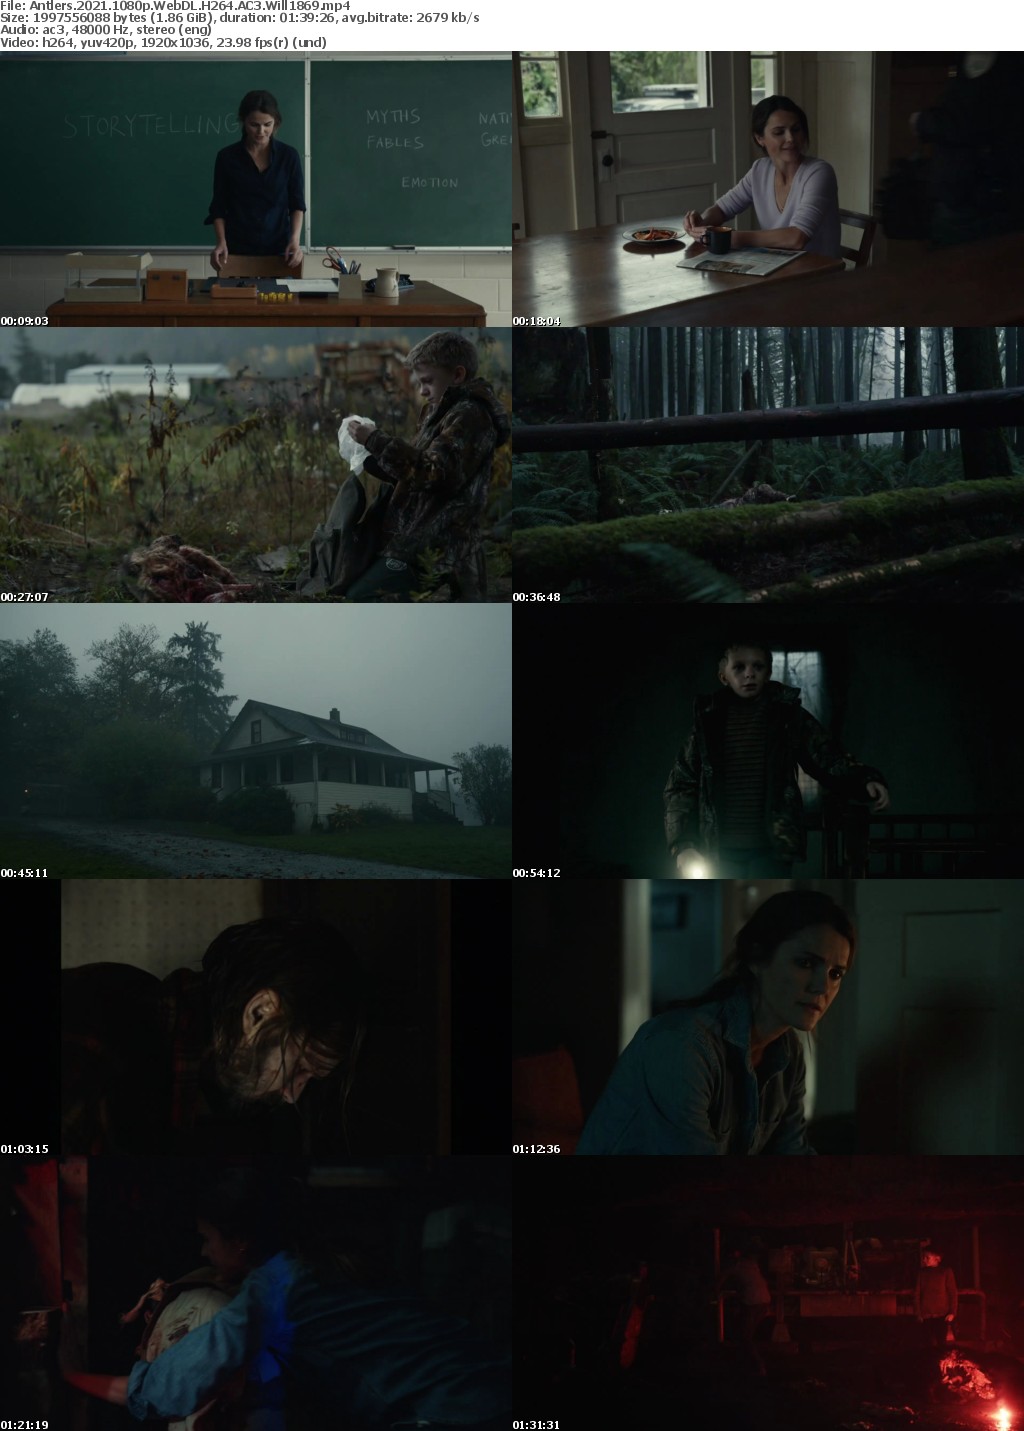 Antlers 2021 1080p WebDL H264 AC3 Will1869